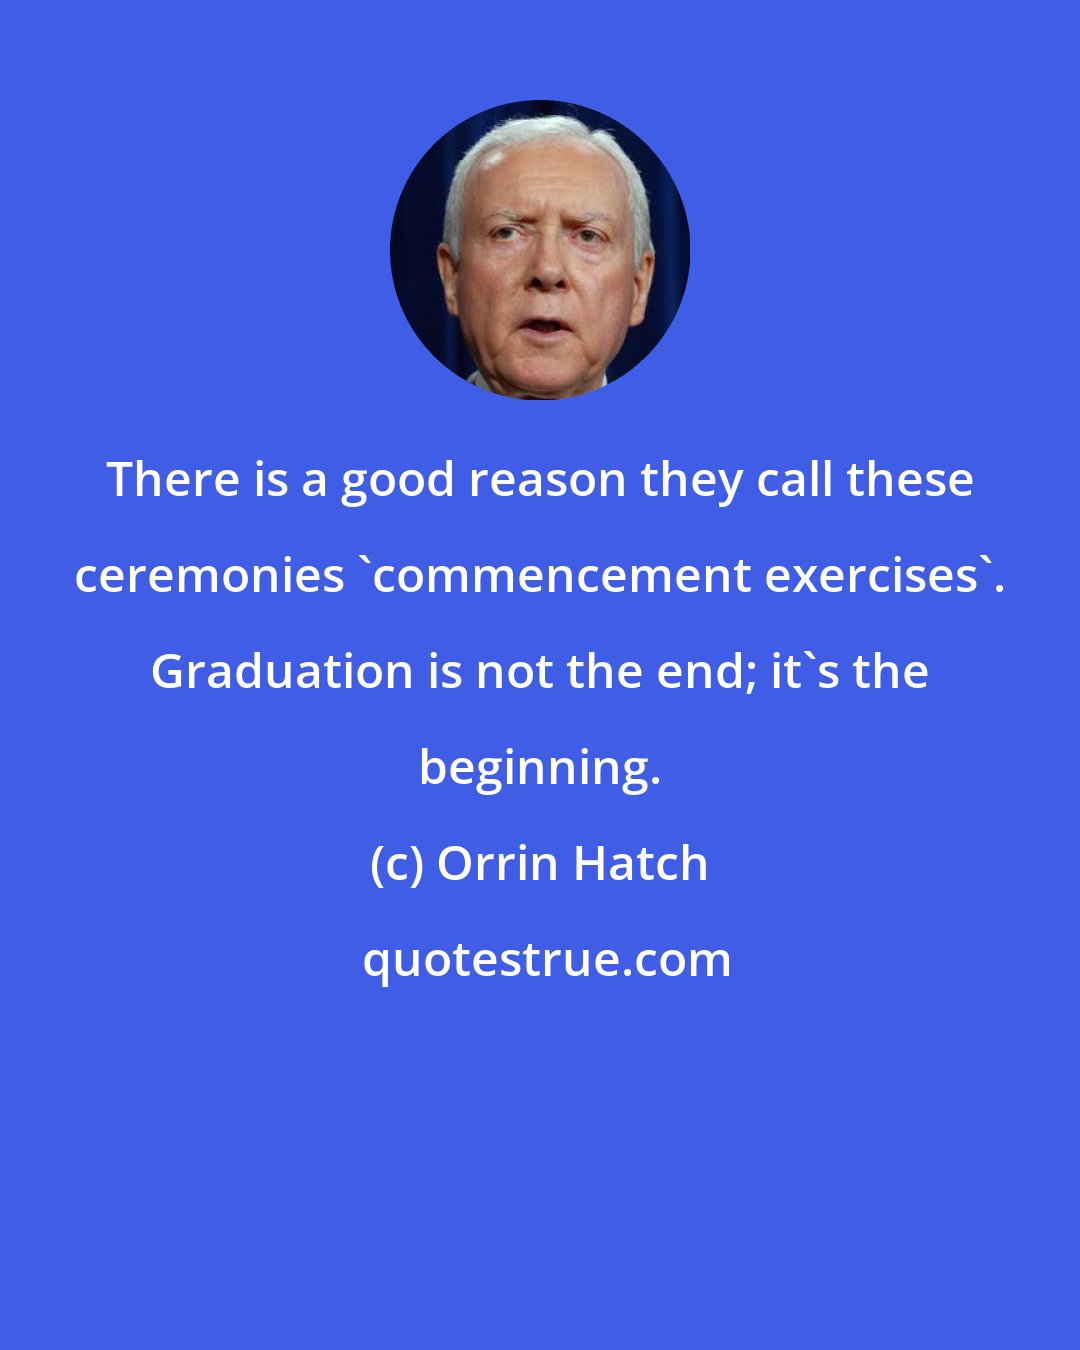 Orrin Hatch: There is a good reason they call these ceremonies 'commencement exercises'. Graduation is not the end; it's the beginning.